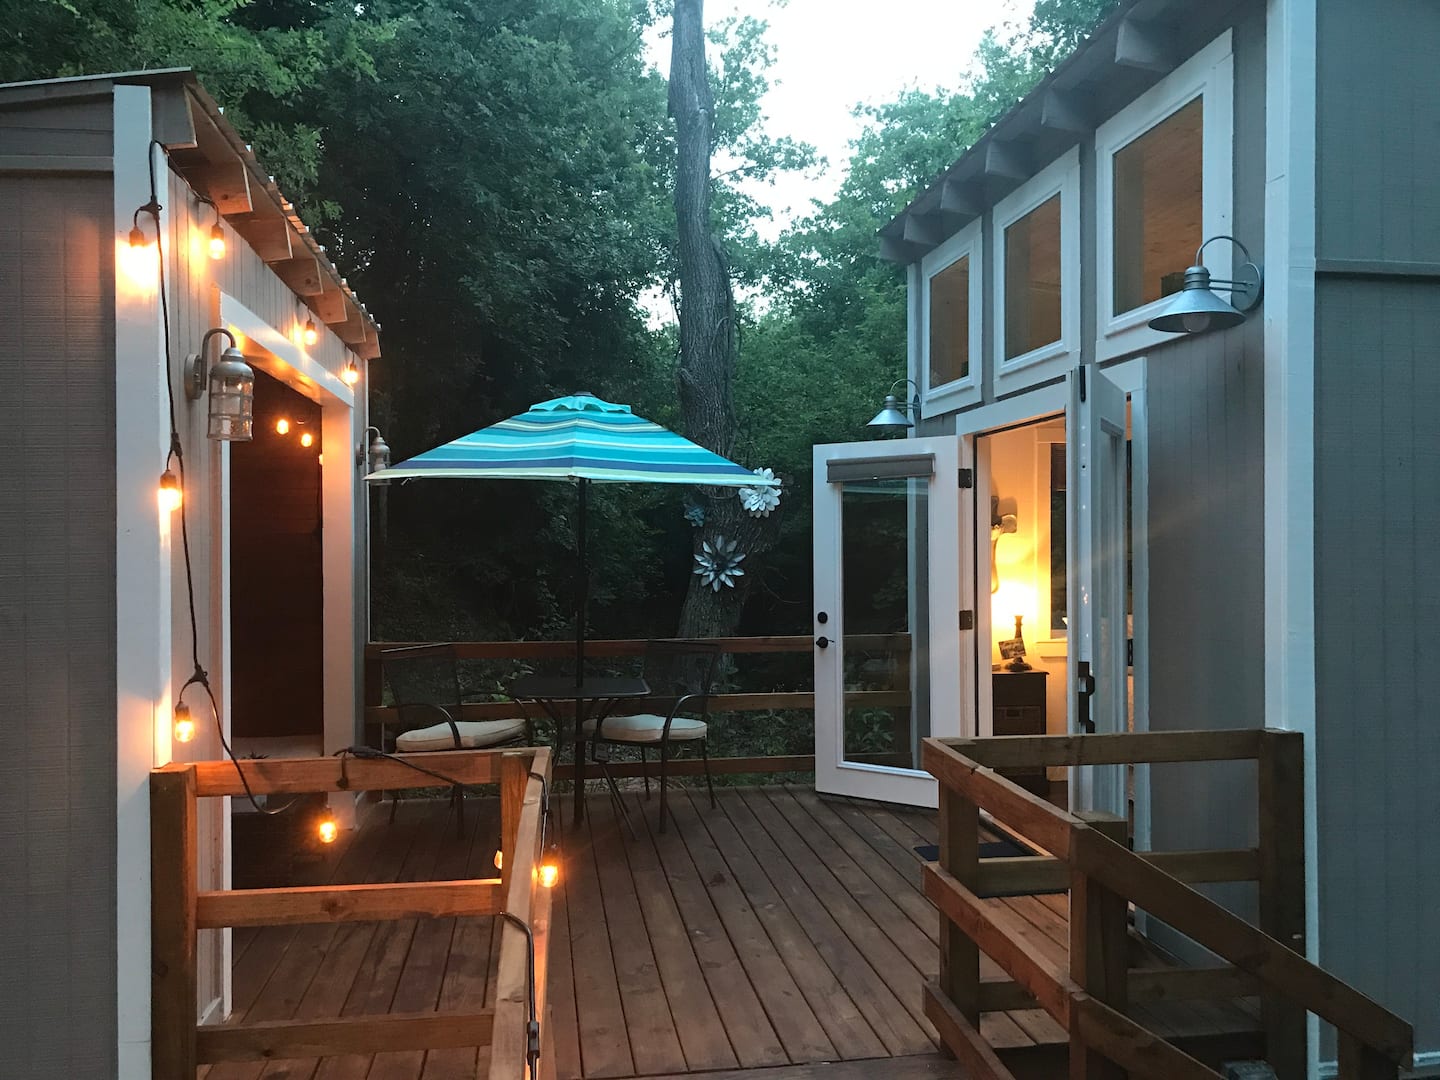 Weatherford Texas treehouse, one of the best natural Airbnbs in Texas